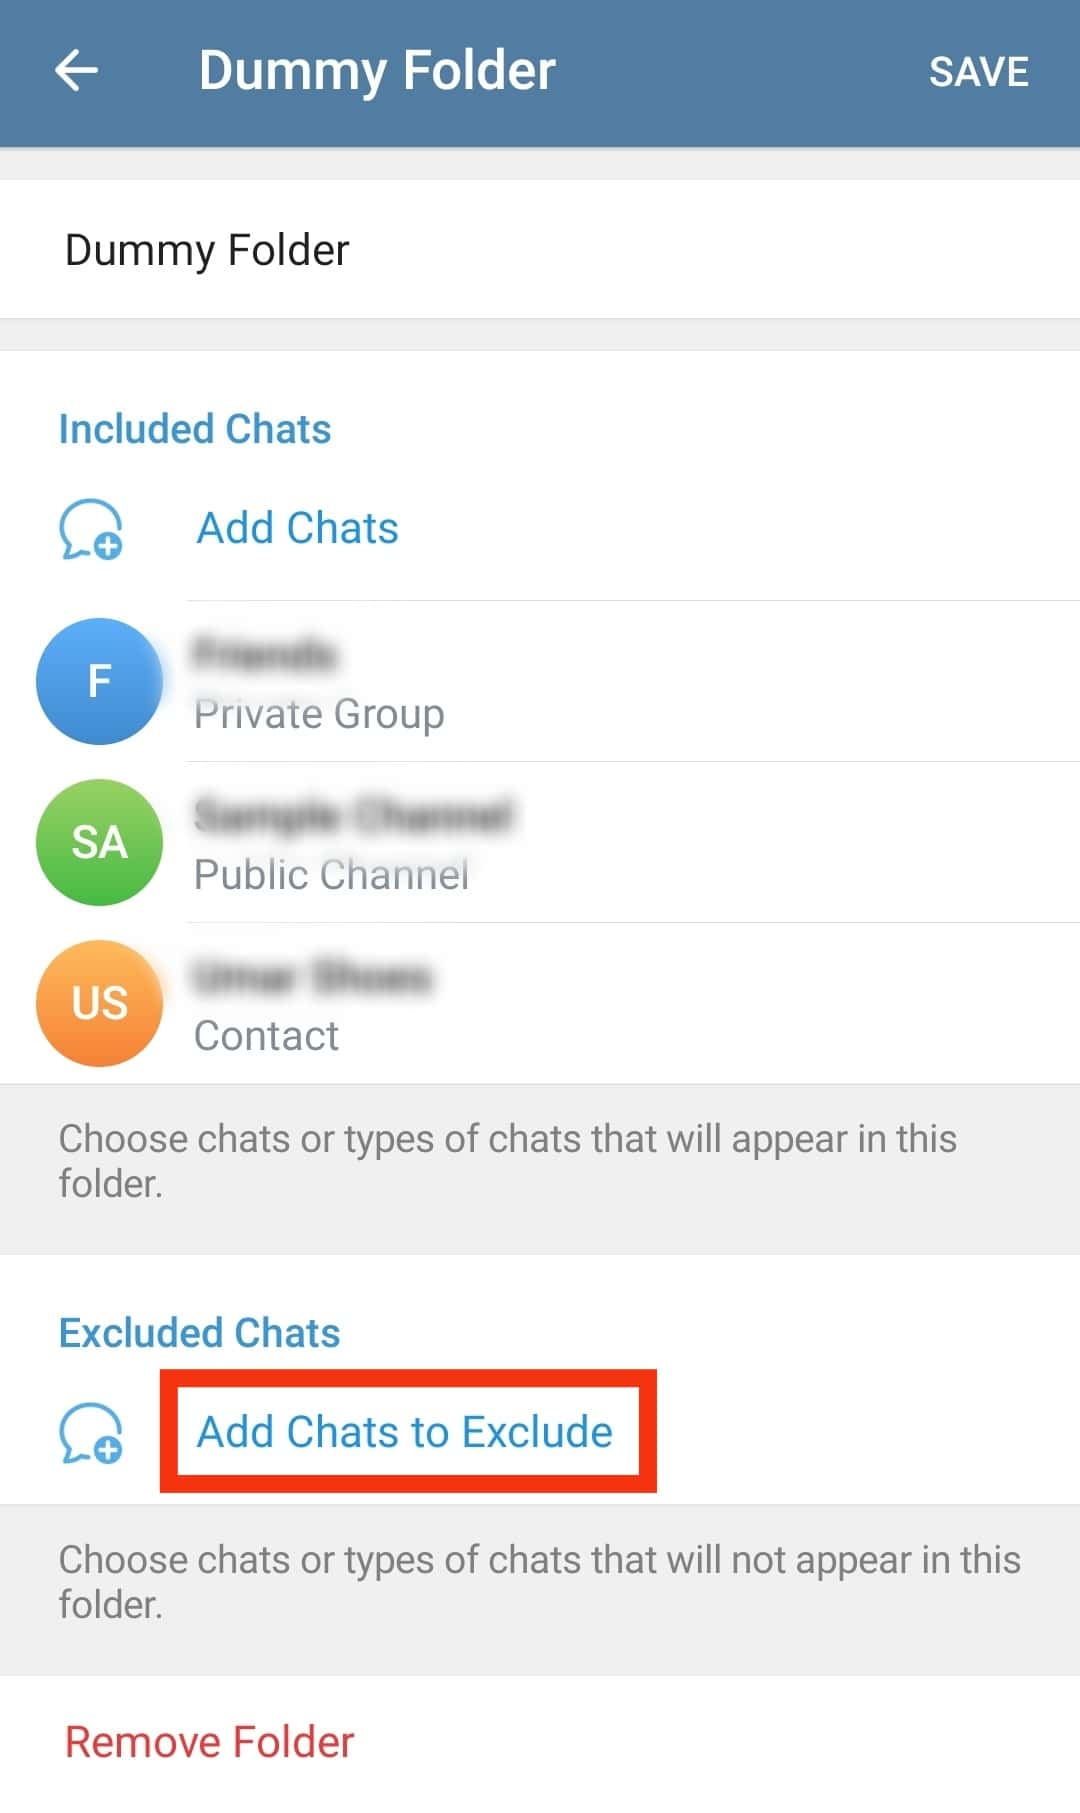 Tap The Excluded Chats Option